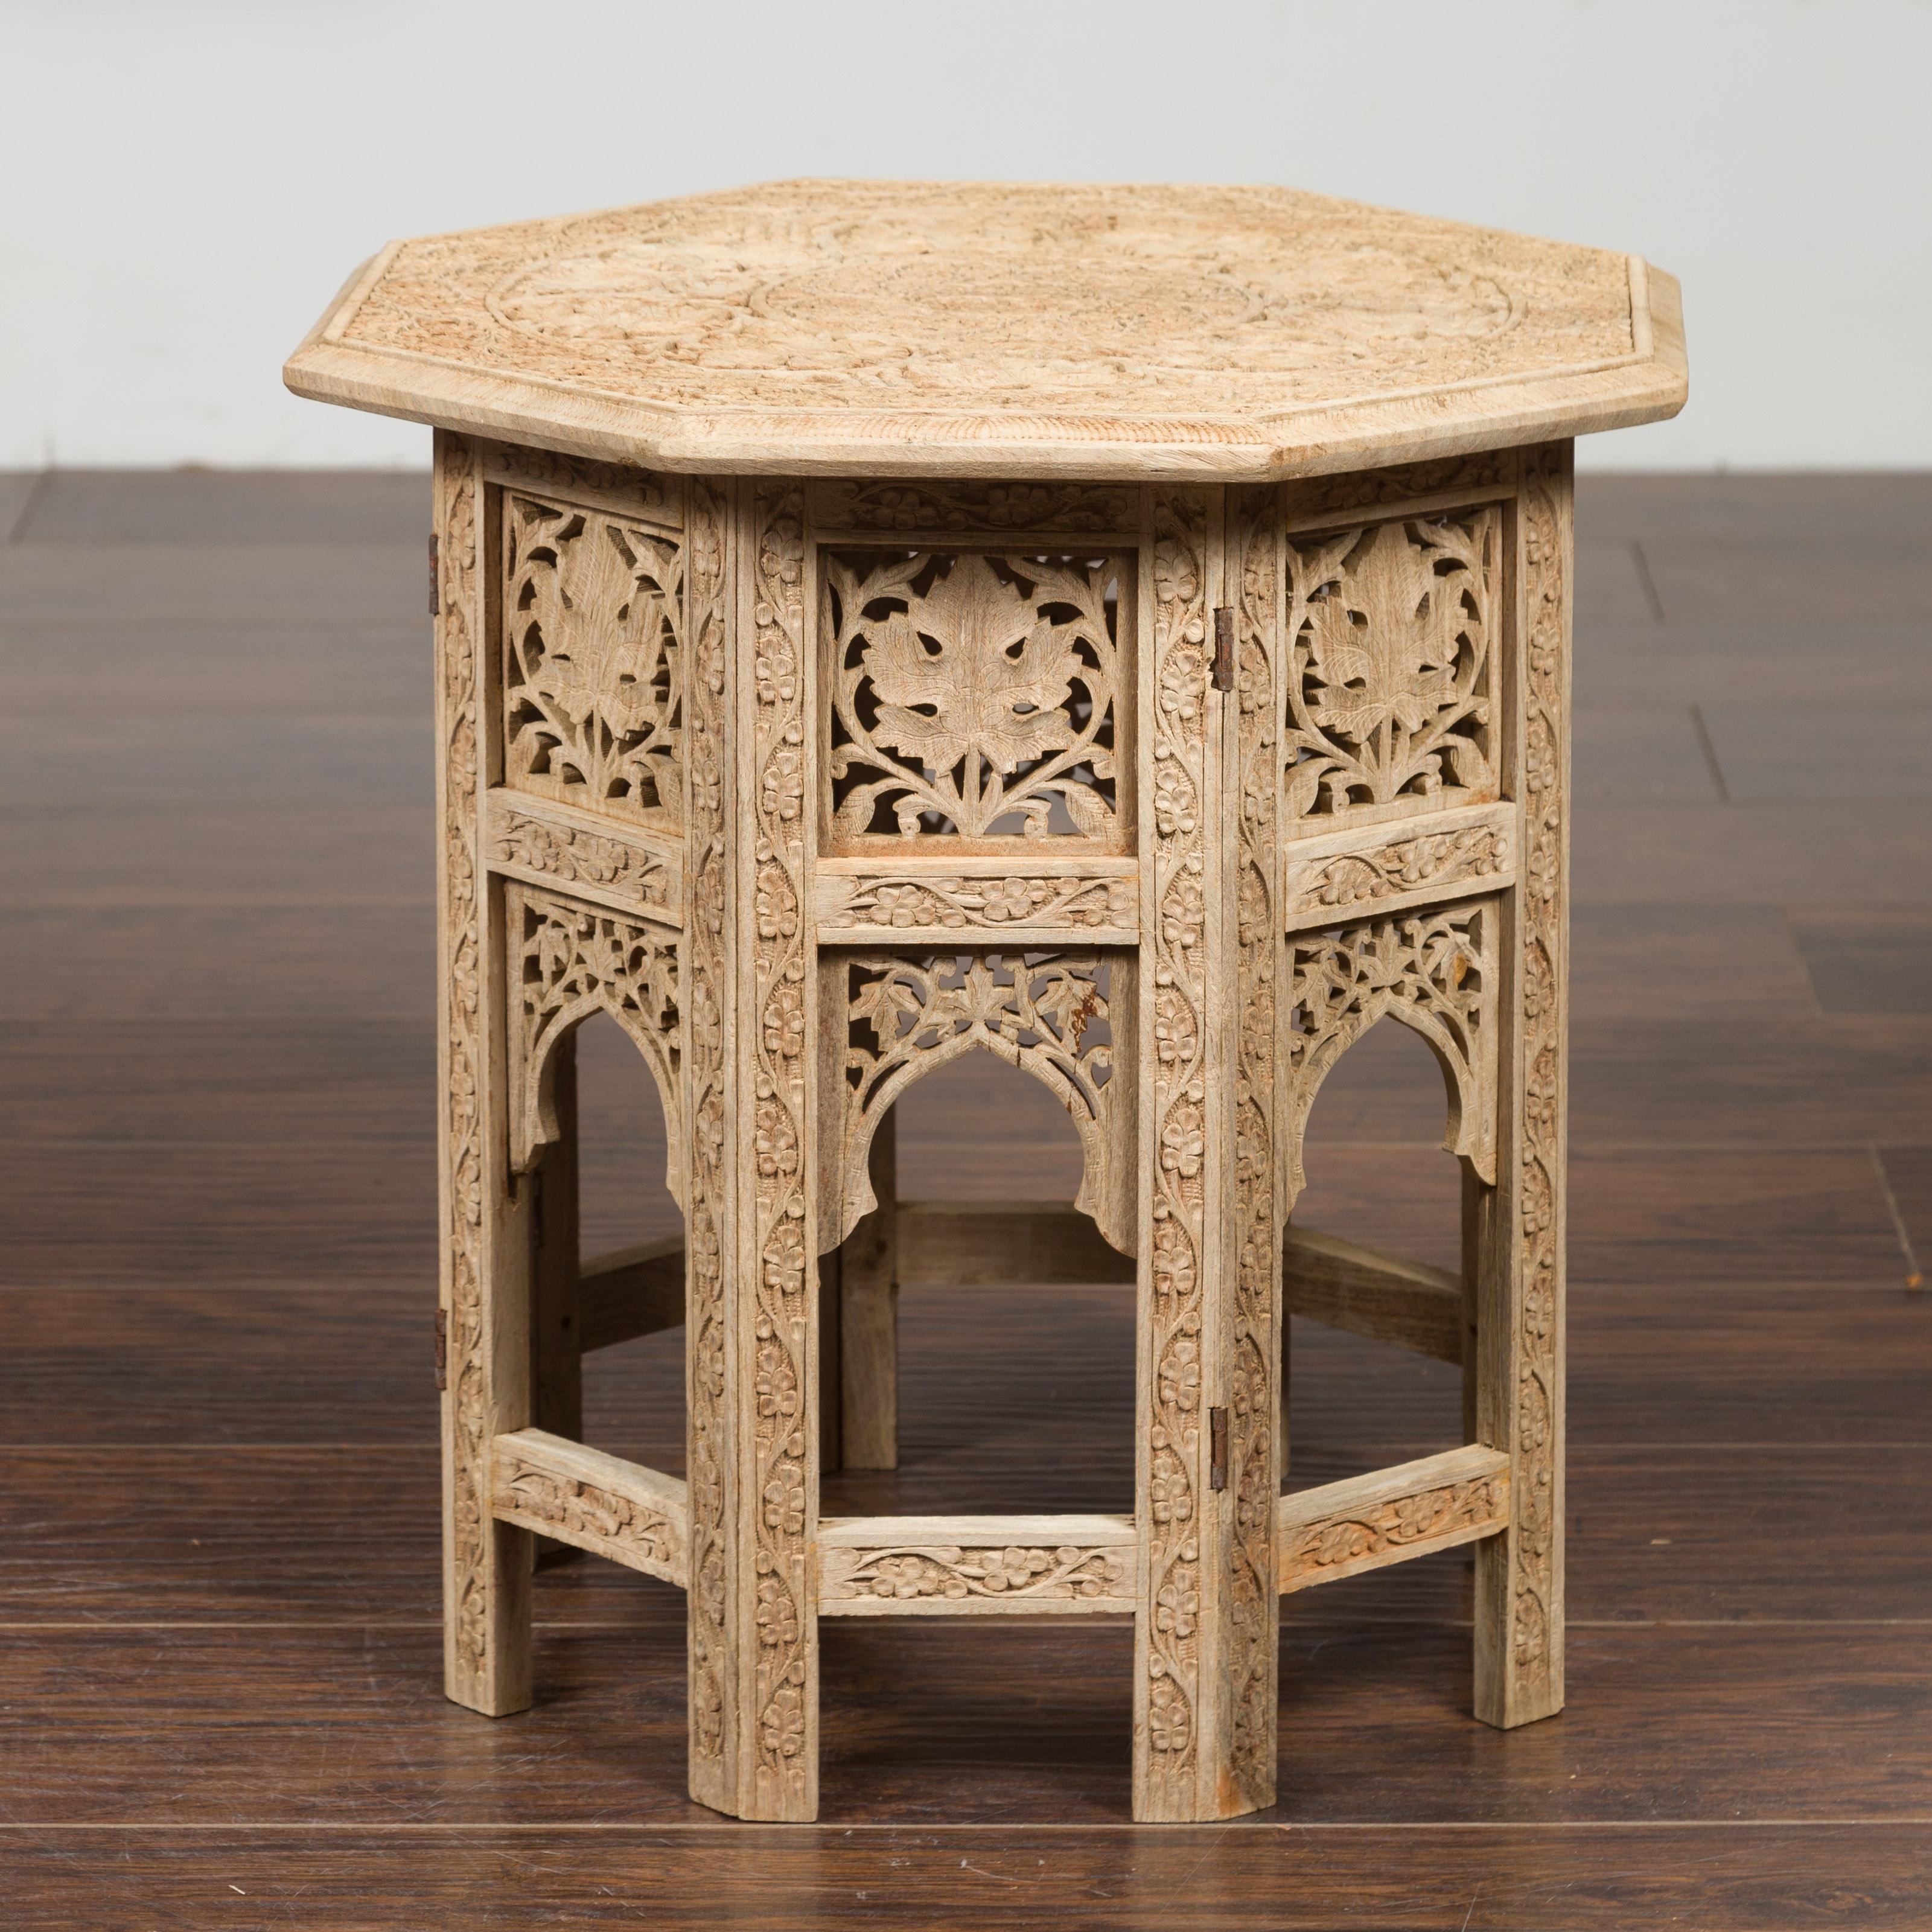 An Anglo-Indian period bleached side table from the mid-20th century, with richly carved foliage motifs. Created during the second quarter of the 20th century, this Anglo-Indian low side table features an octagonal top adorned with low-relief